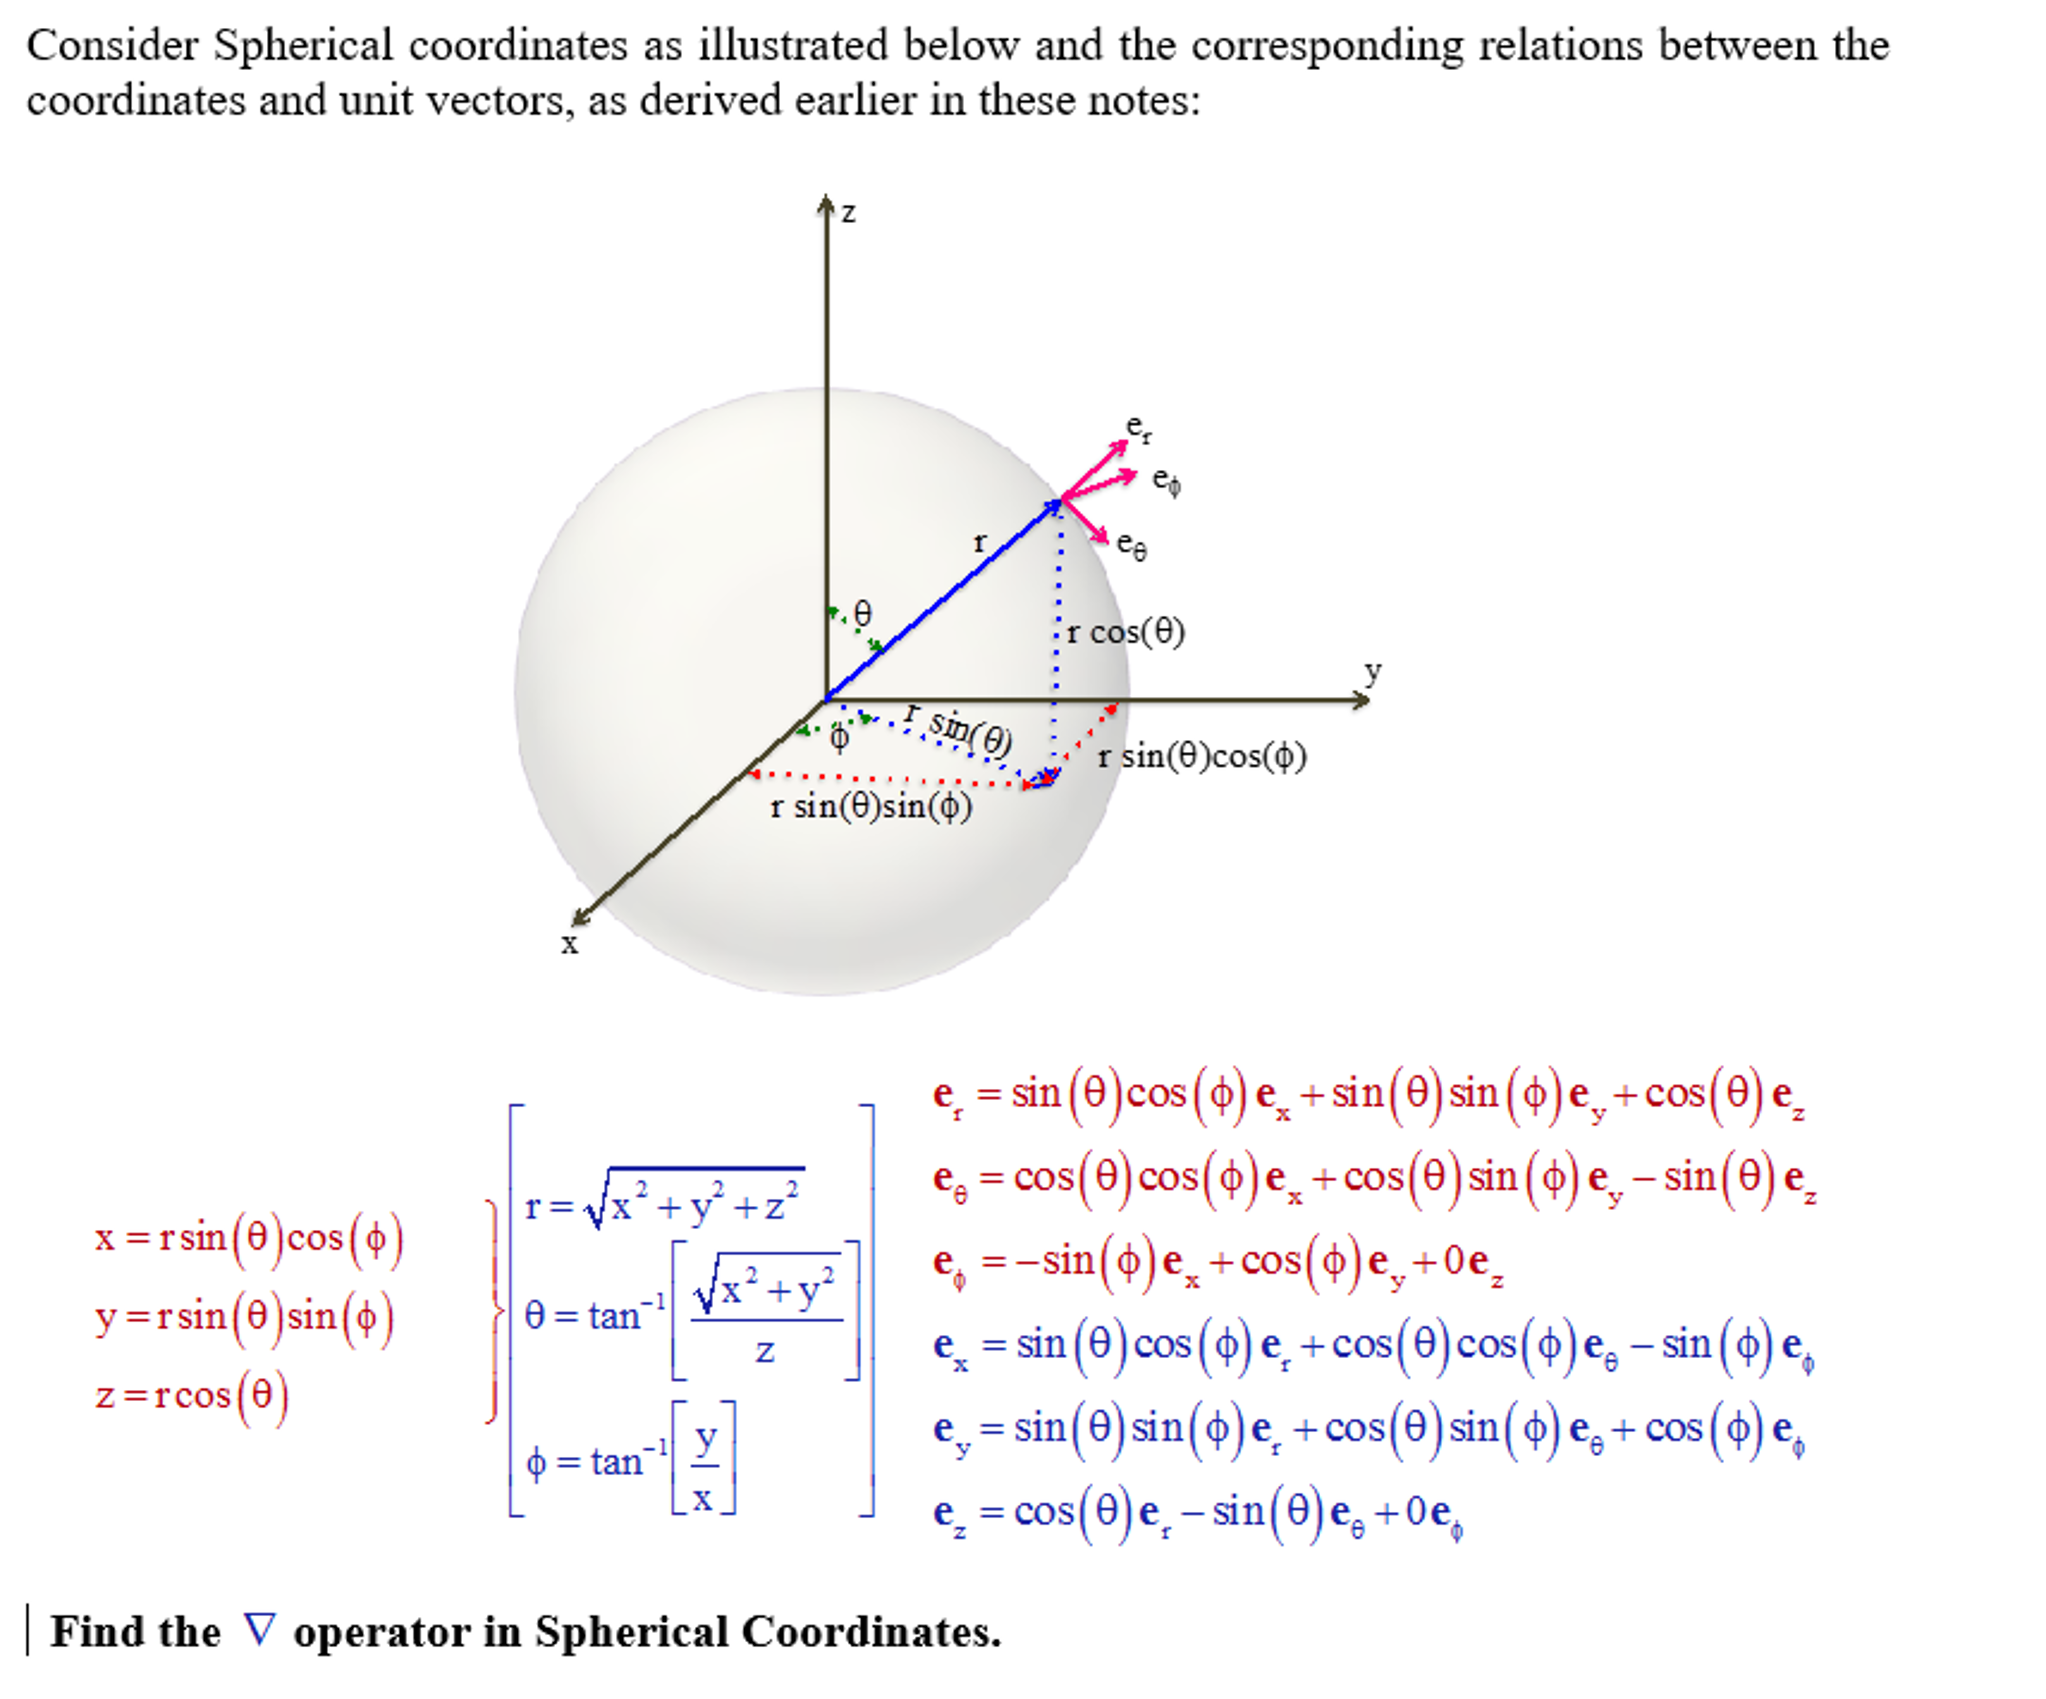 solved-consider-spherical-coordinates-as-illustrated-below-chegg